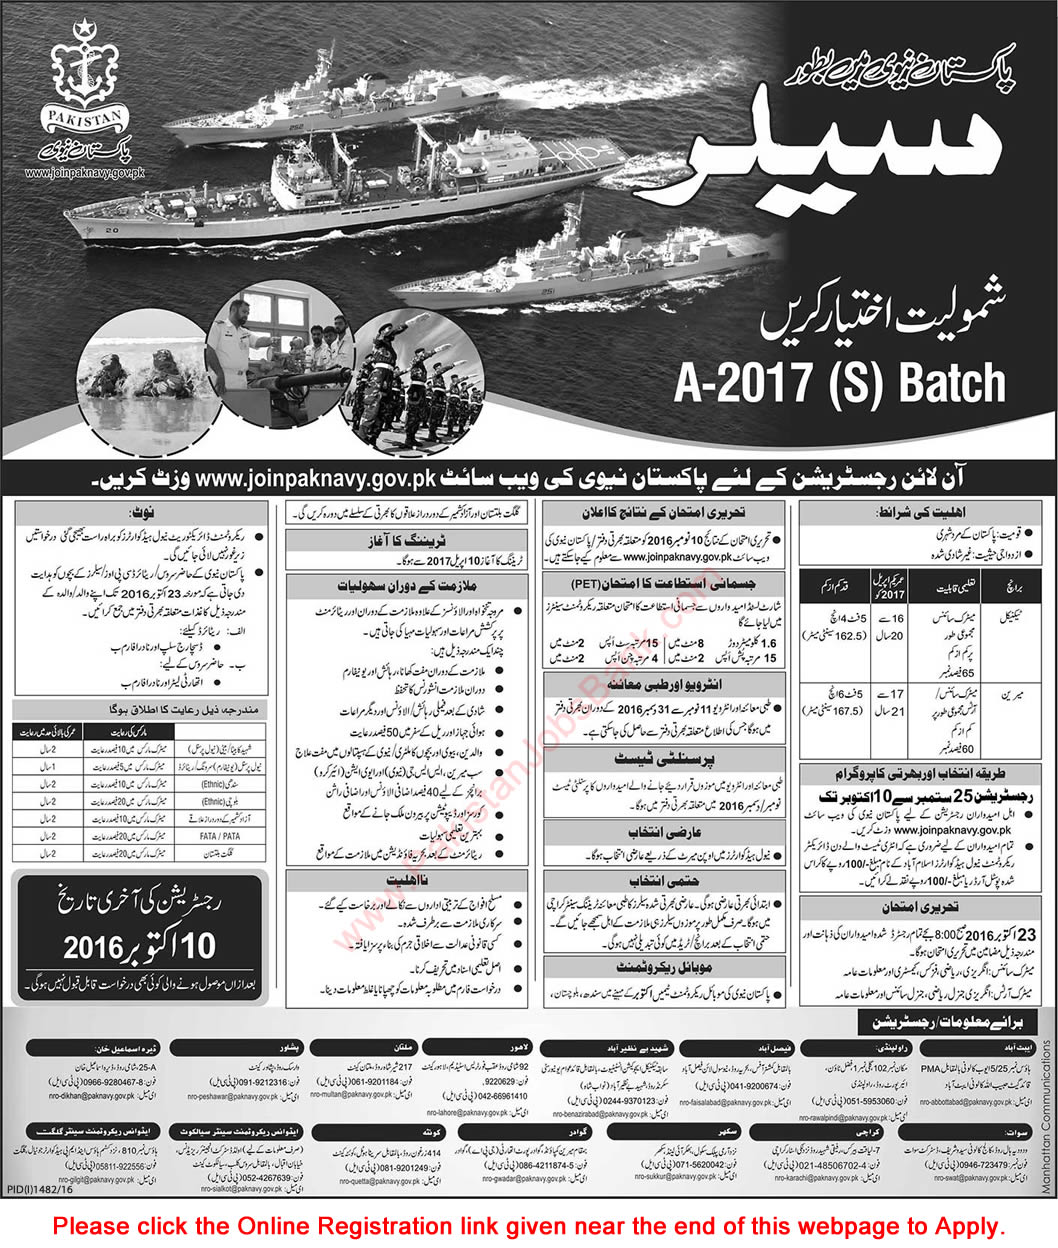 Join Pakistan Navy as Sailor September 2016 Online Registration Form Jobs in A-2017(S) Batch Latest